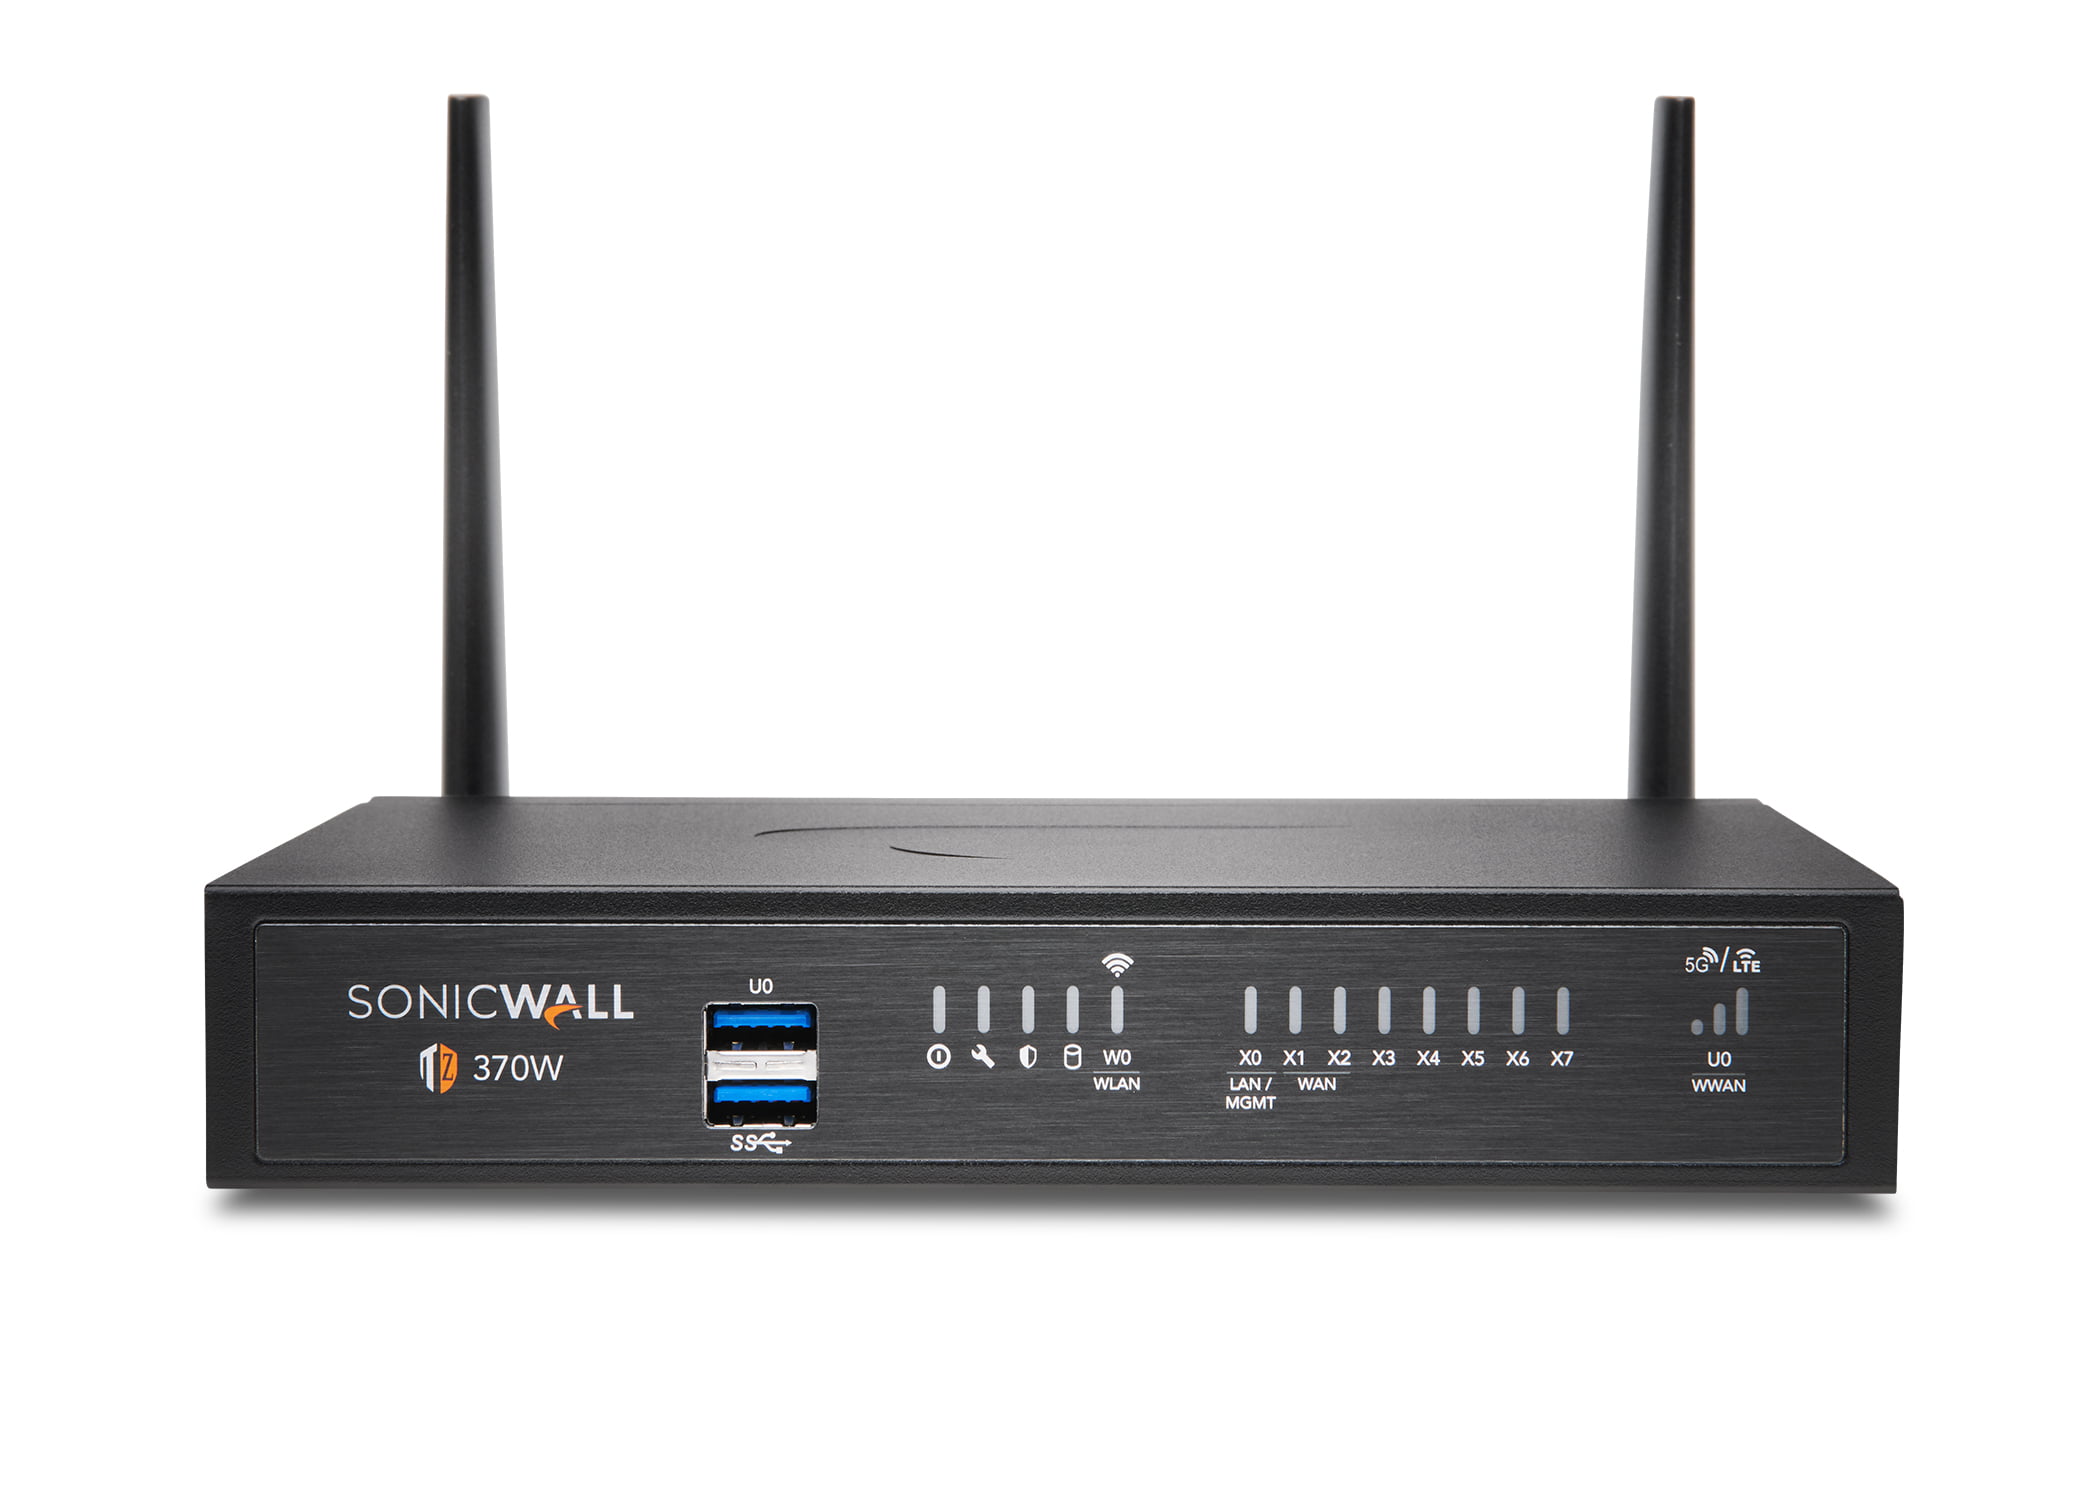 SONICWALL TZ370W + THREAT PROTECTION SERVICE SUITE (TPSS)